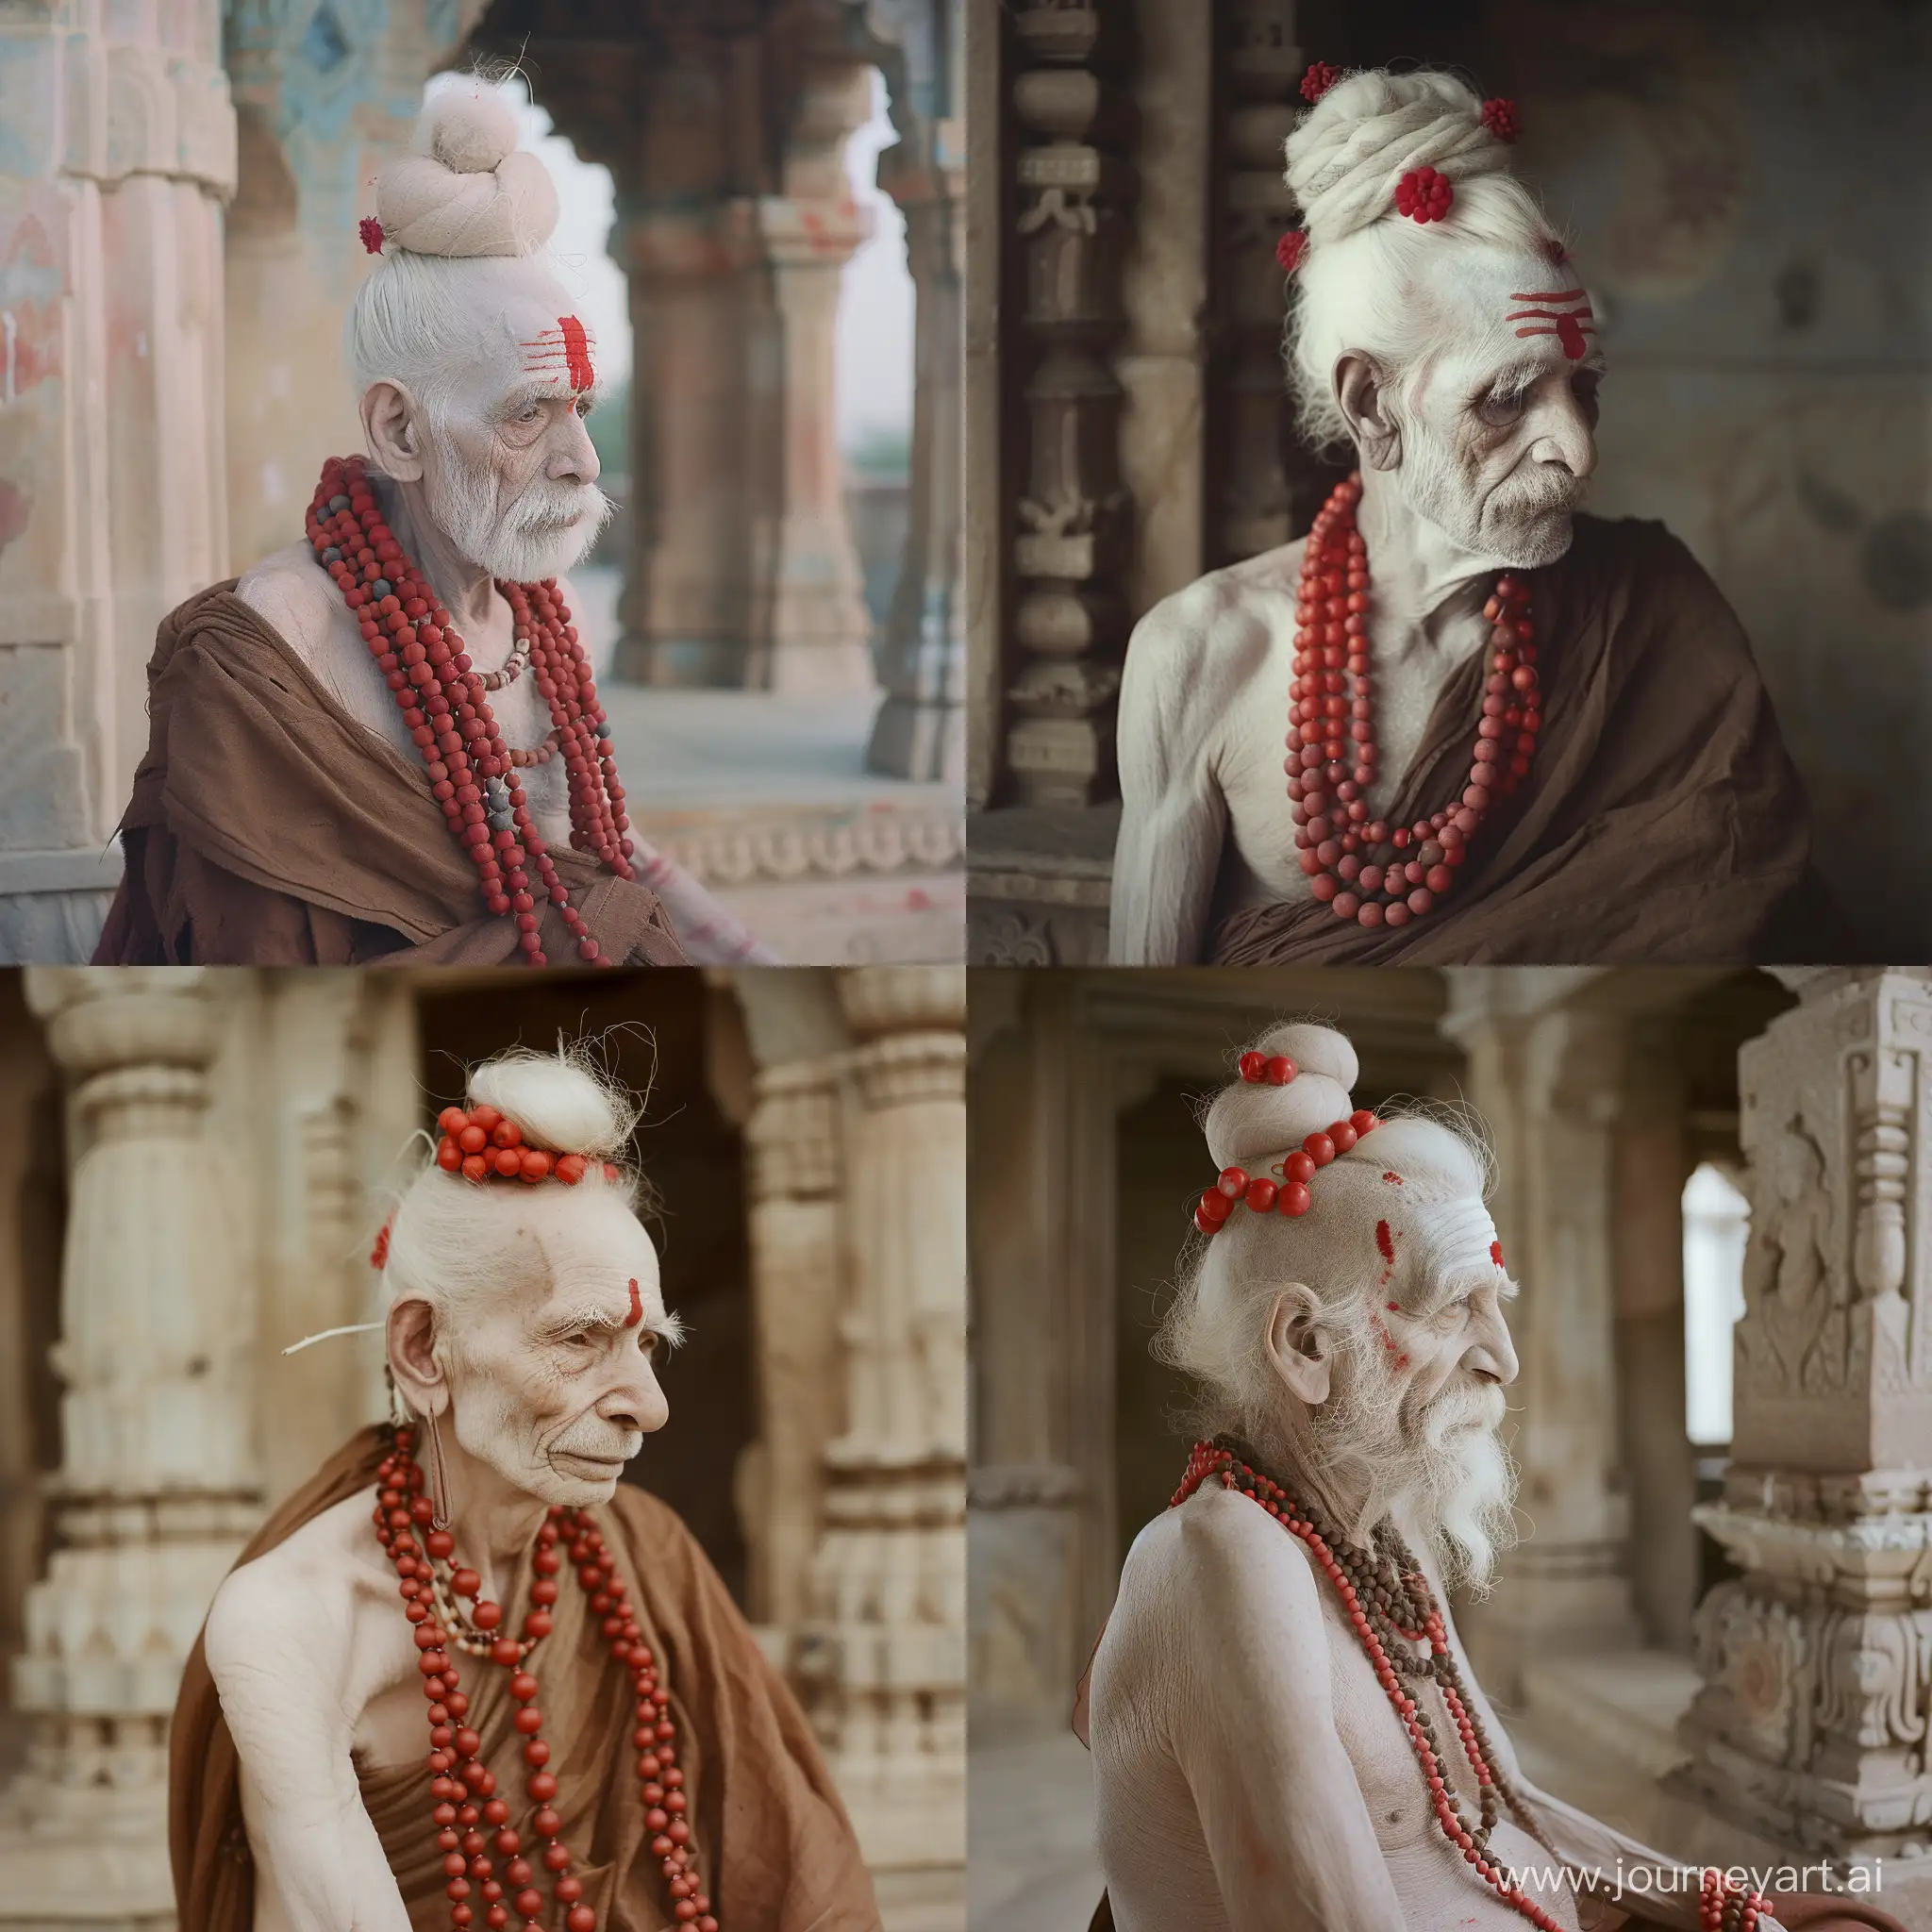    a 80 years old naga sadhu india  whit in his hair  red beads and around his neck  white   hair in haarknot  whit skin  wearing  underneath a old brown cloth is sitting    before  old tempel rajasthan
  total body 35mm soft contrast soft light